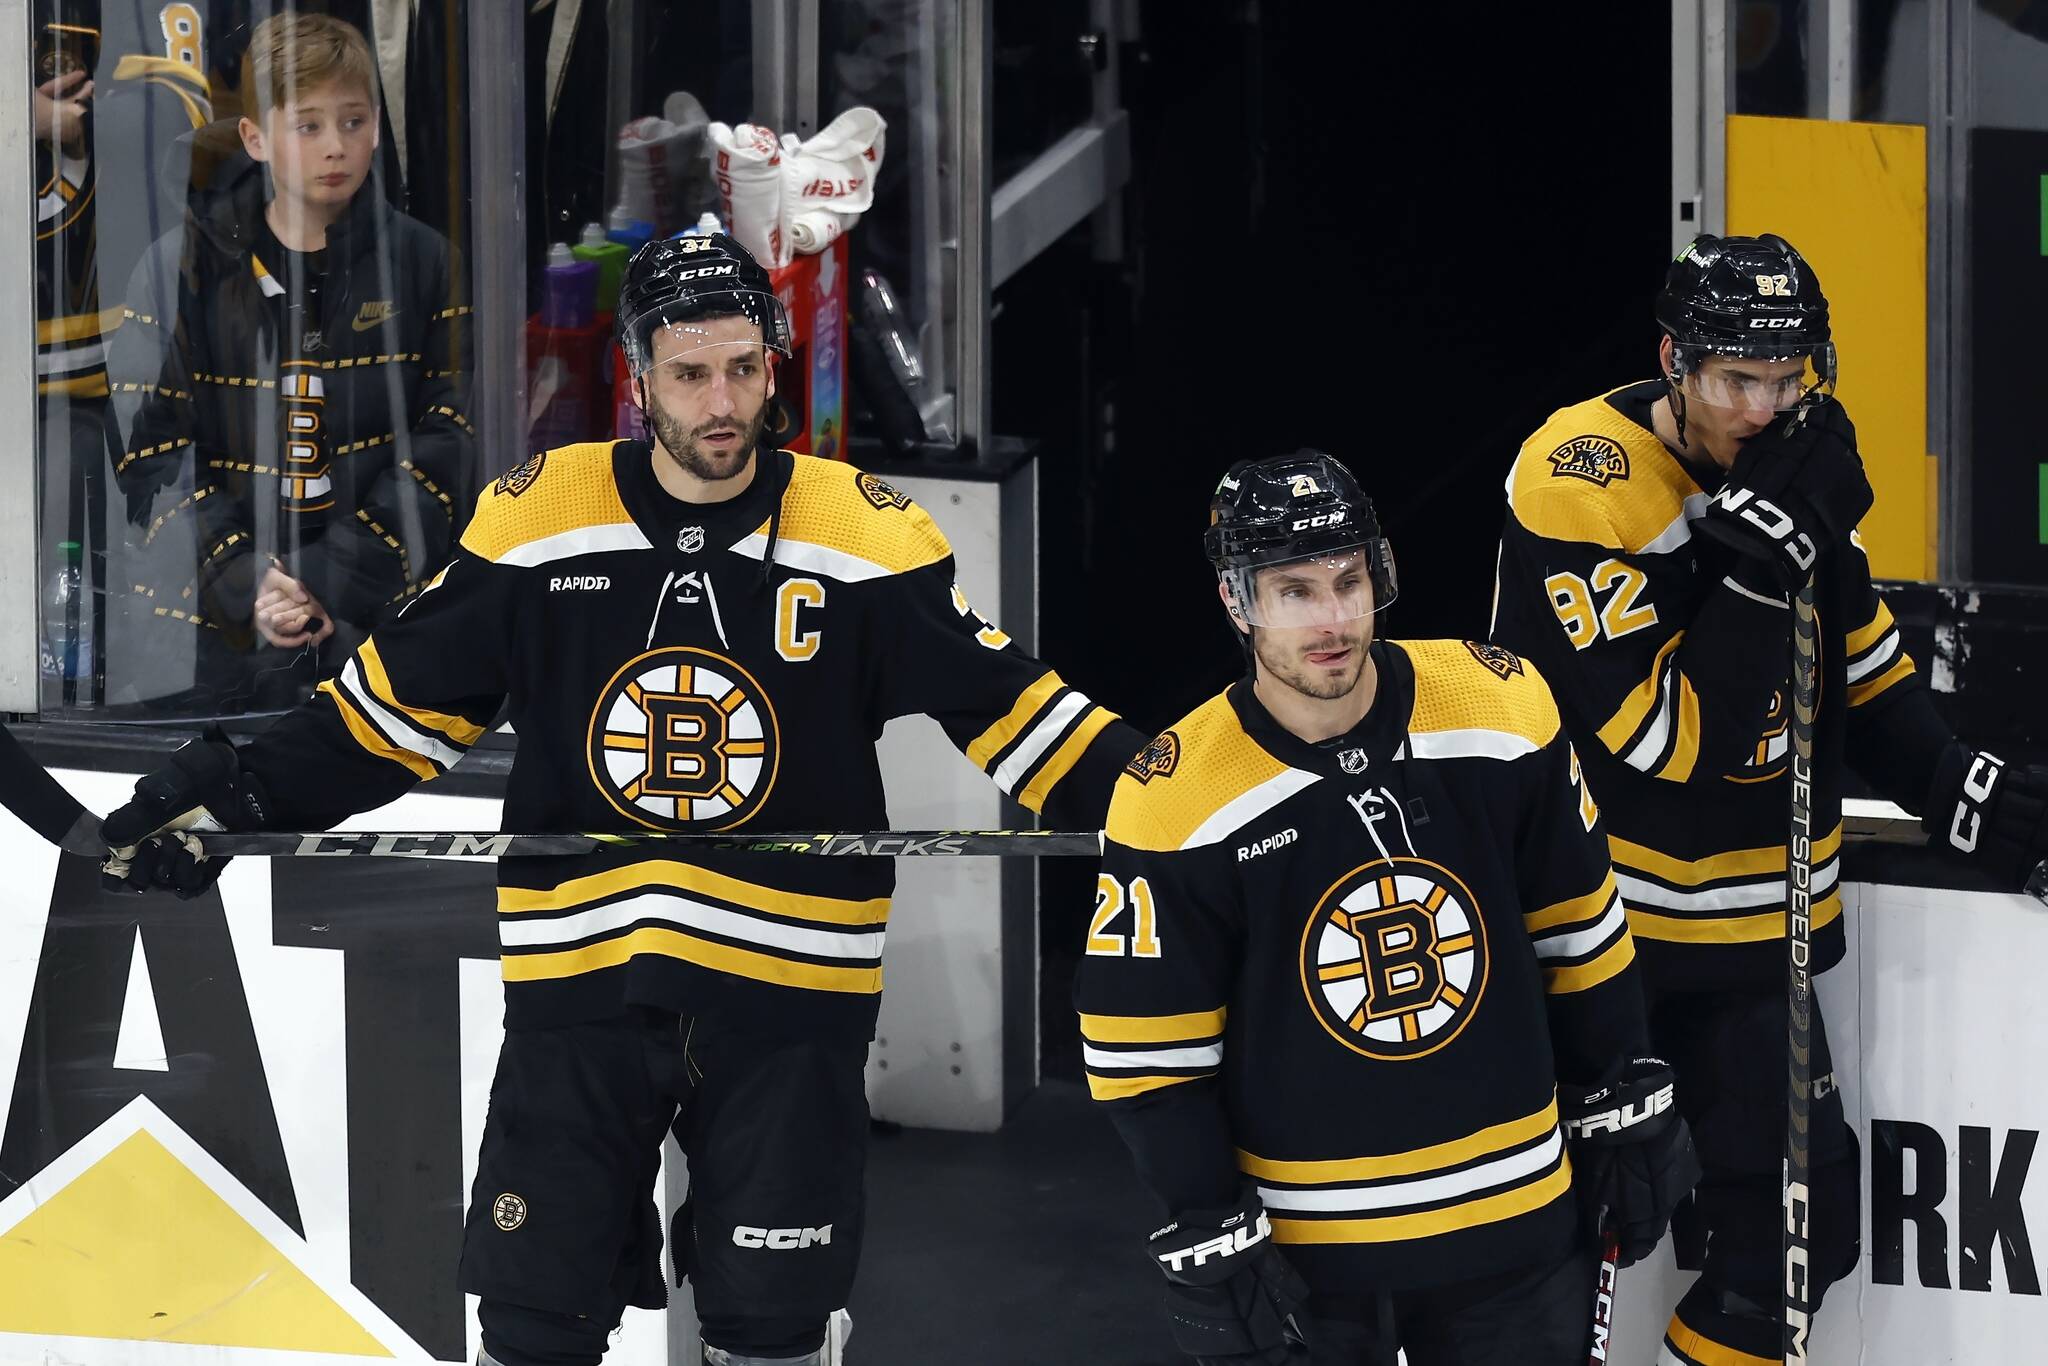 Boston Bruins’ Patrice Bergeron (37) stands with Garnet Hathaway (21) and Tomas Nosek (92) after losing to the Florida Panthers in overtime during Game 7 of an NHL hockey Stanley Cup first-round playoff series, Sunday, April 30, 2023, in Boston. (AP Photo/Michael Dwyer)